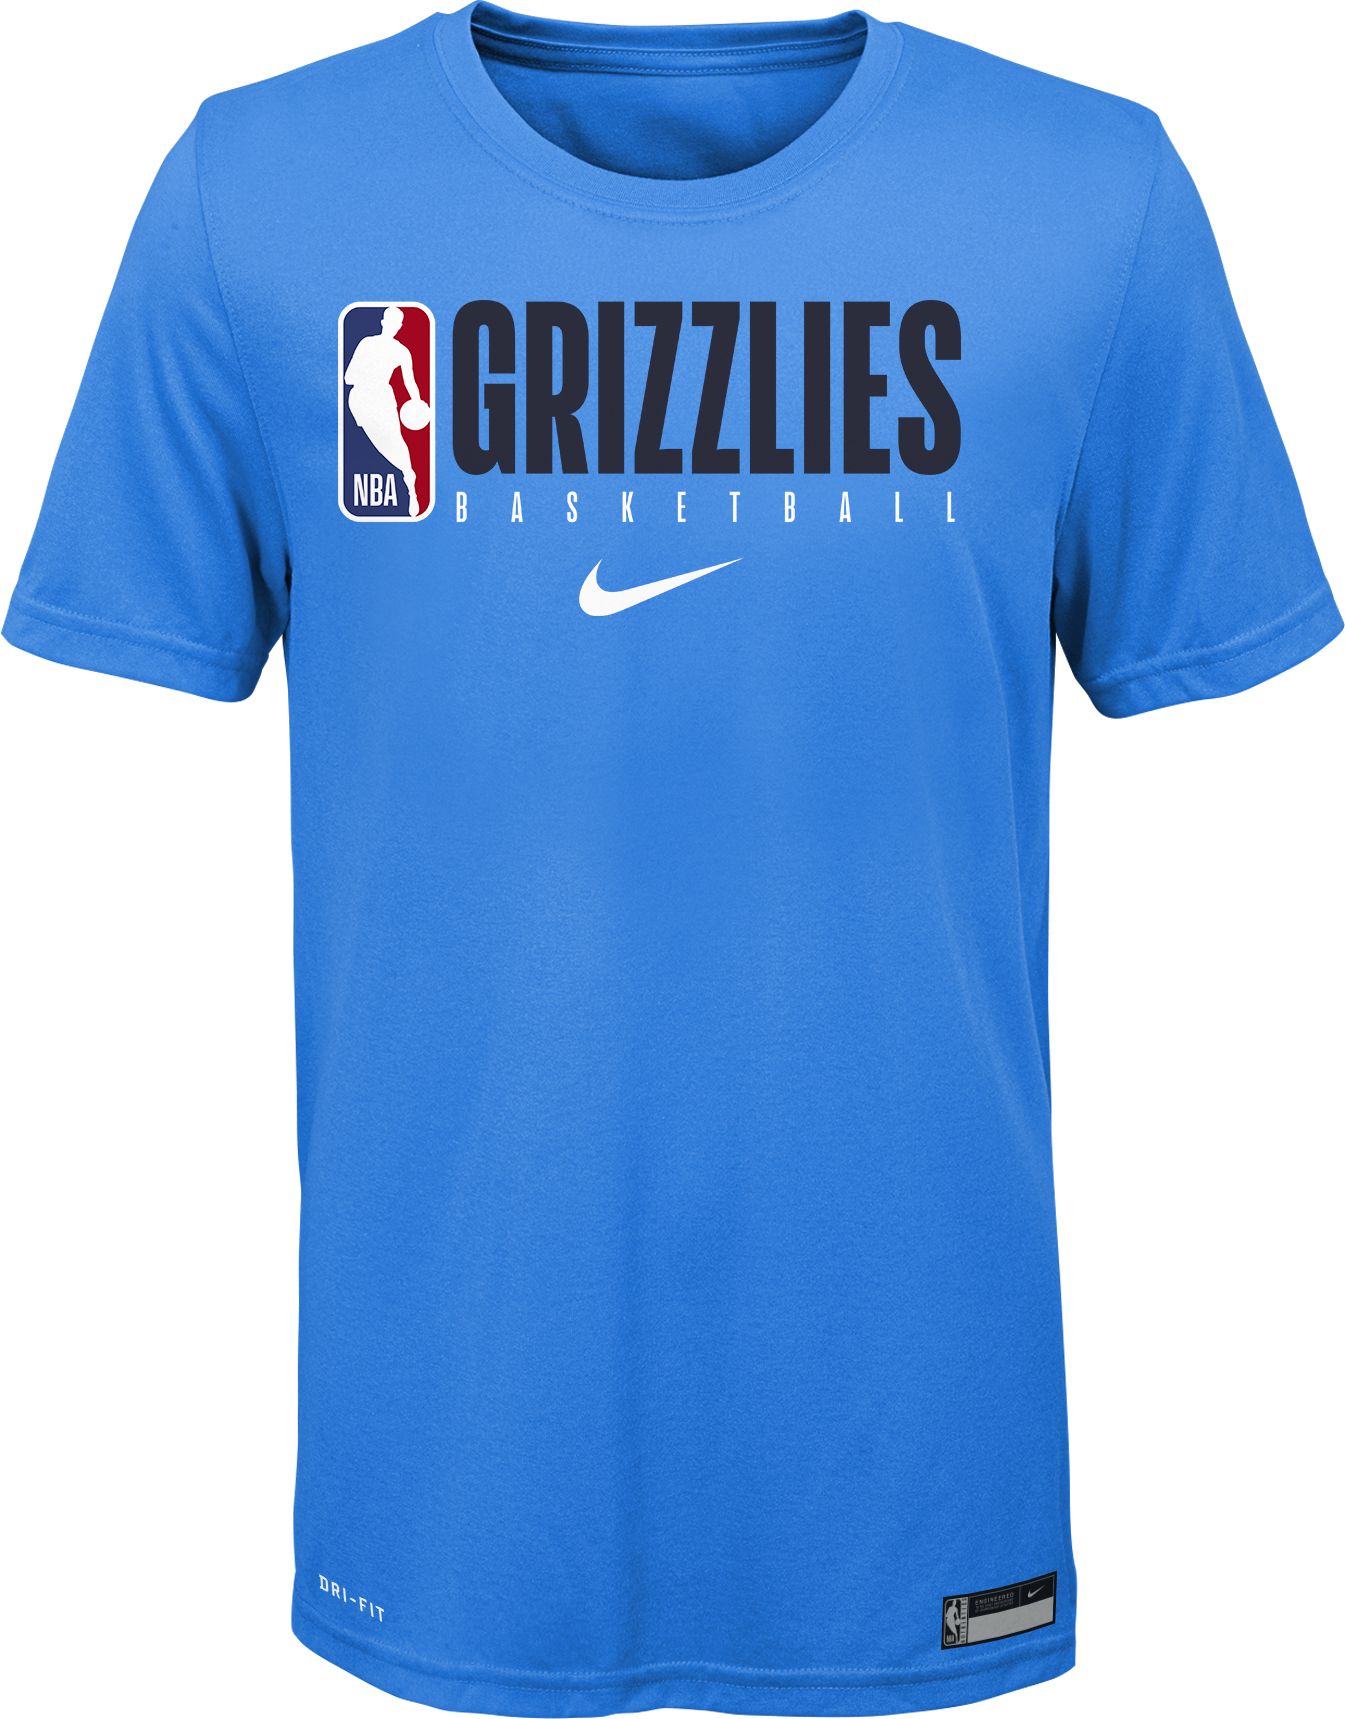 memphis grizzlies youth jersey